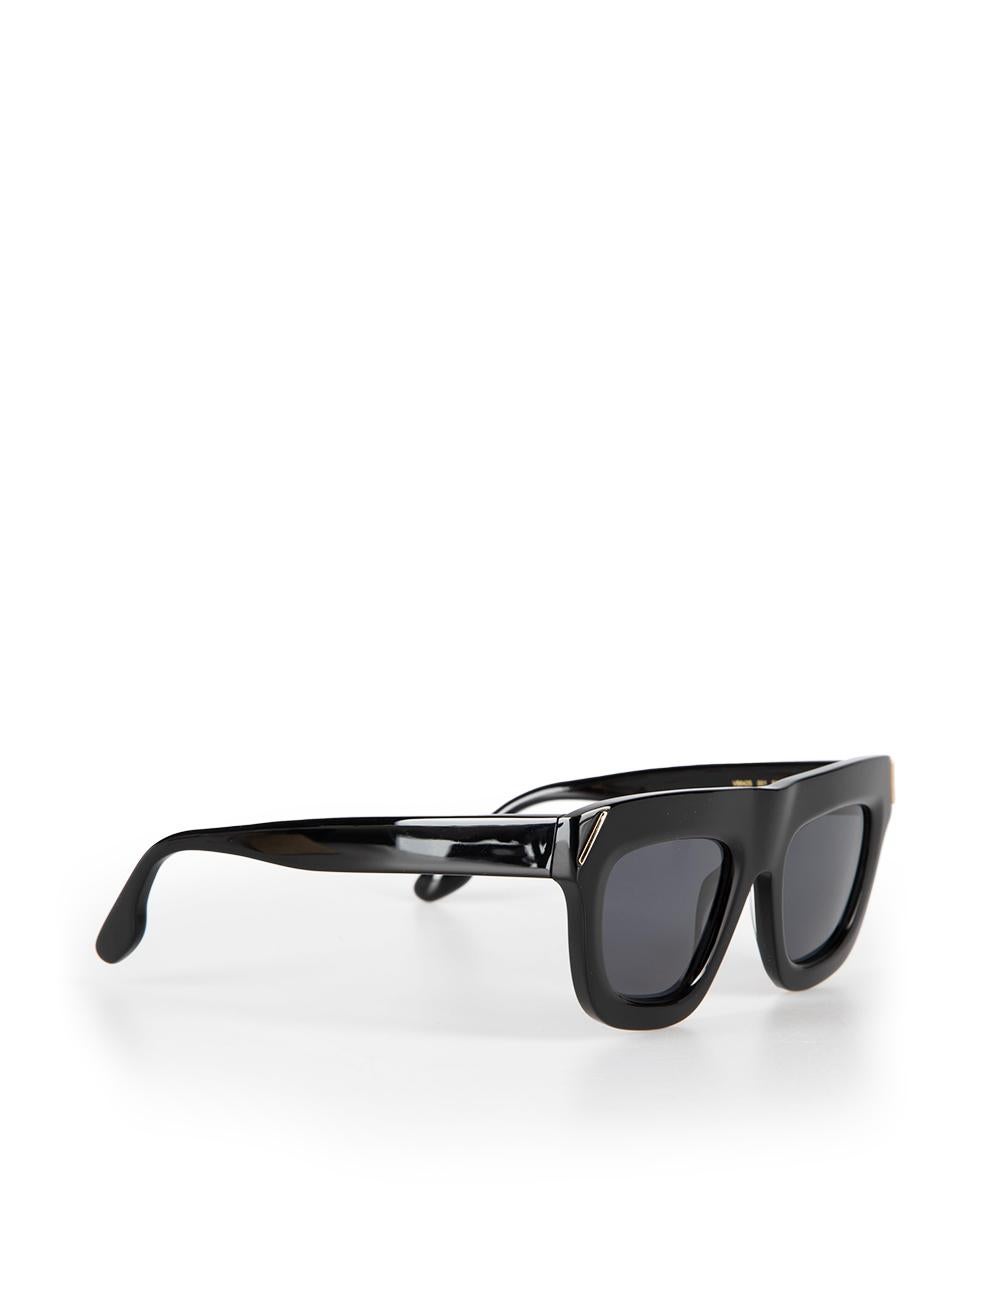 Victoria Beckham Black Browline Tinted Sunglasses In New Condition For Sale In London, GB